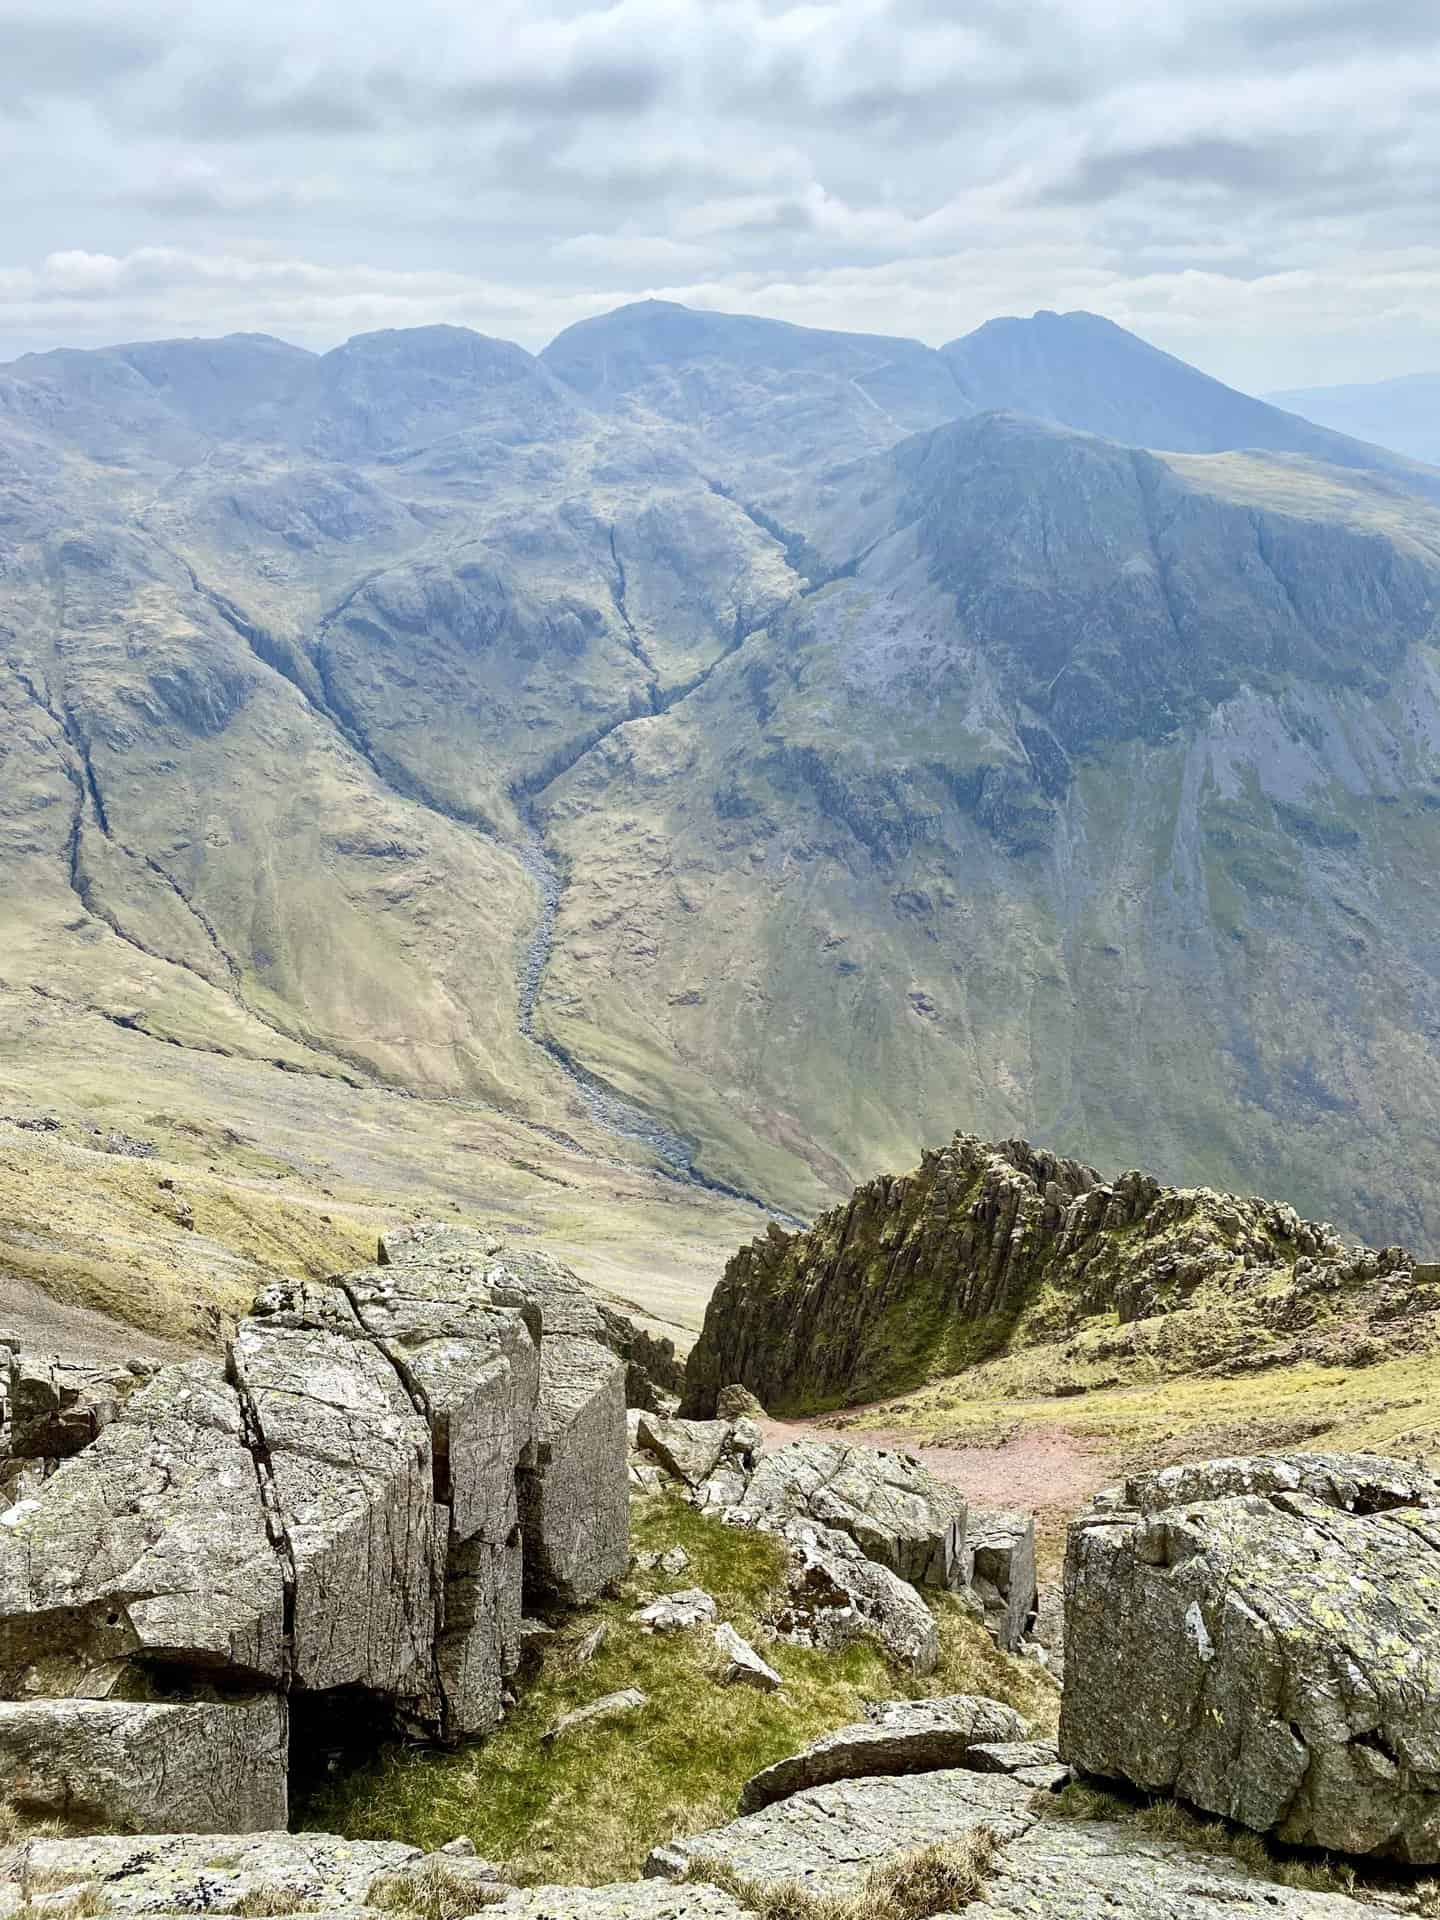 The view south from Westmorland Cairn towards Scafell Pike (centre, horizon). To the right of Scafell Pike is Sca Fell and to the left is Broad Crag and Ill Crag. Lingmell sits in front of Sca Fell. 